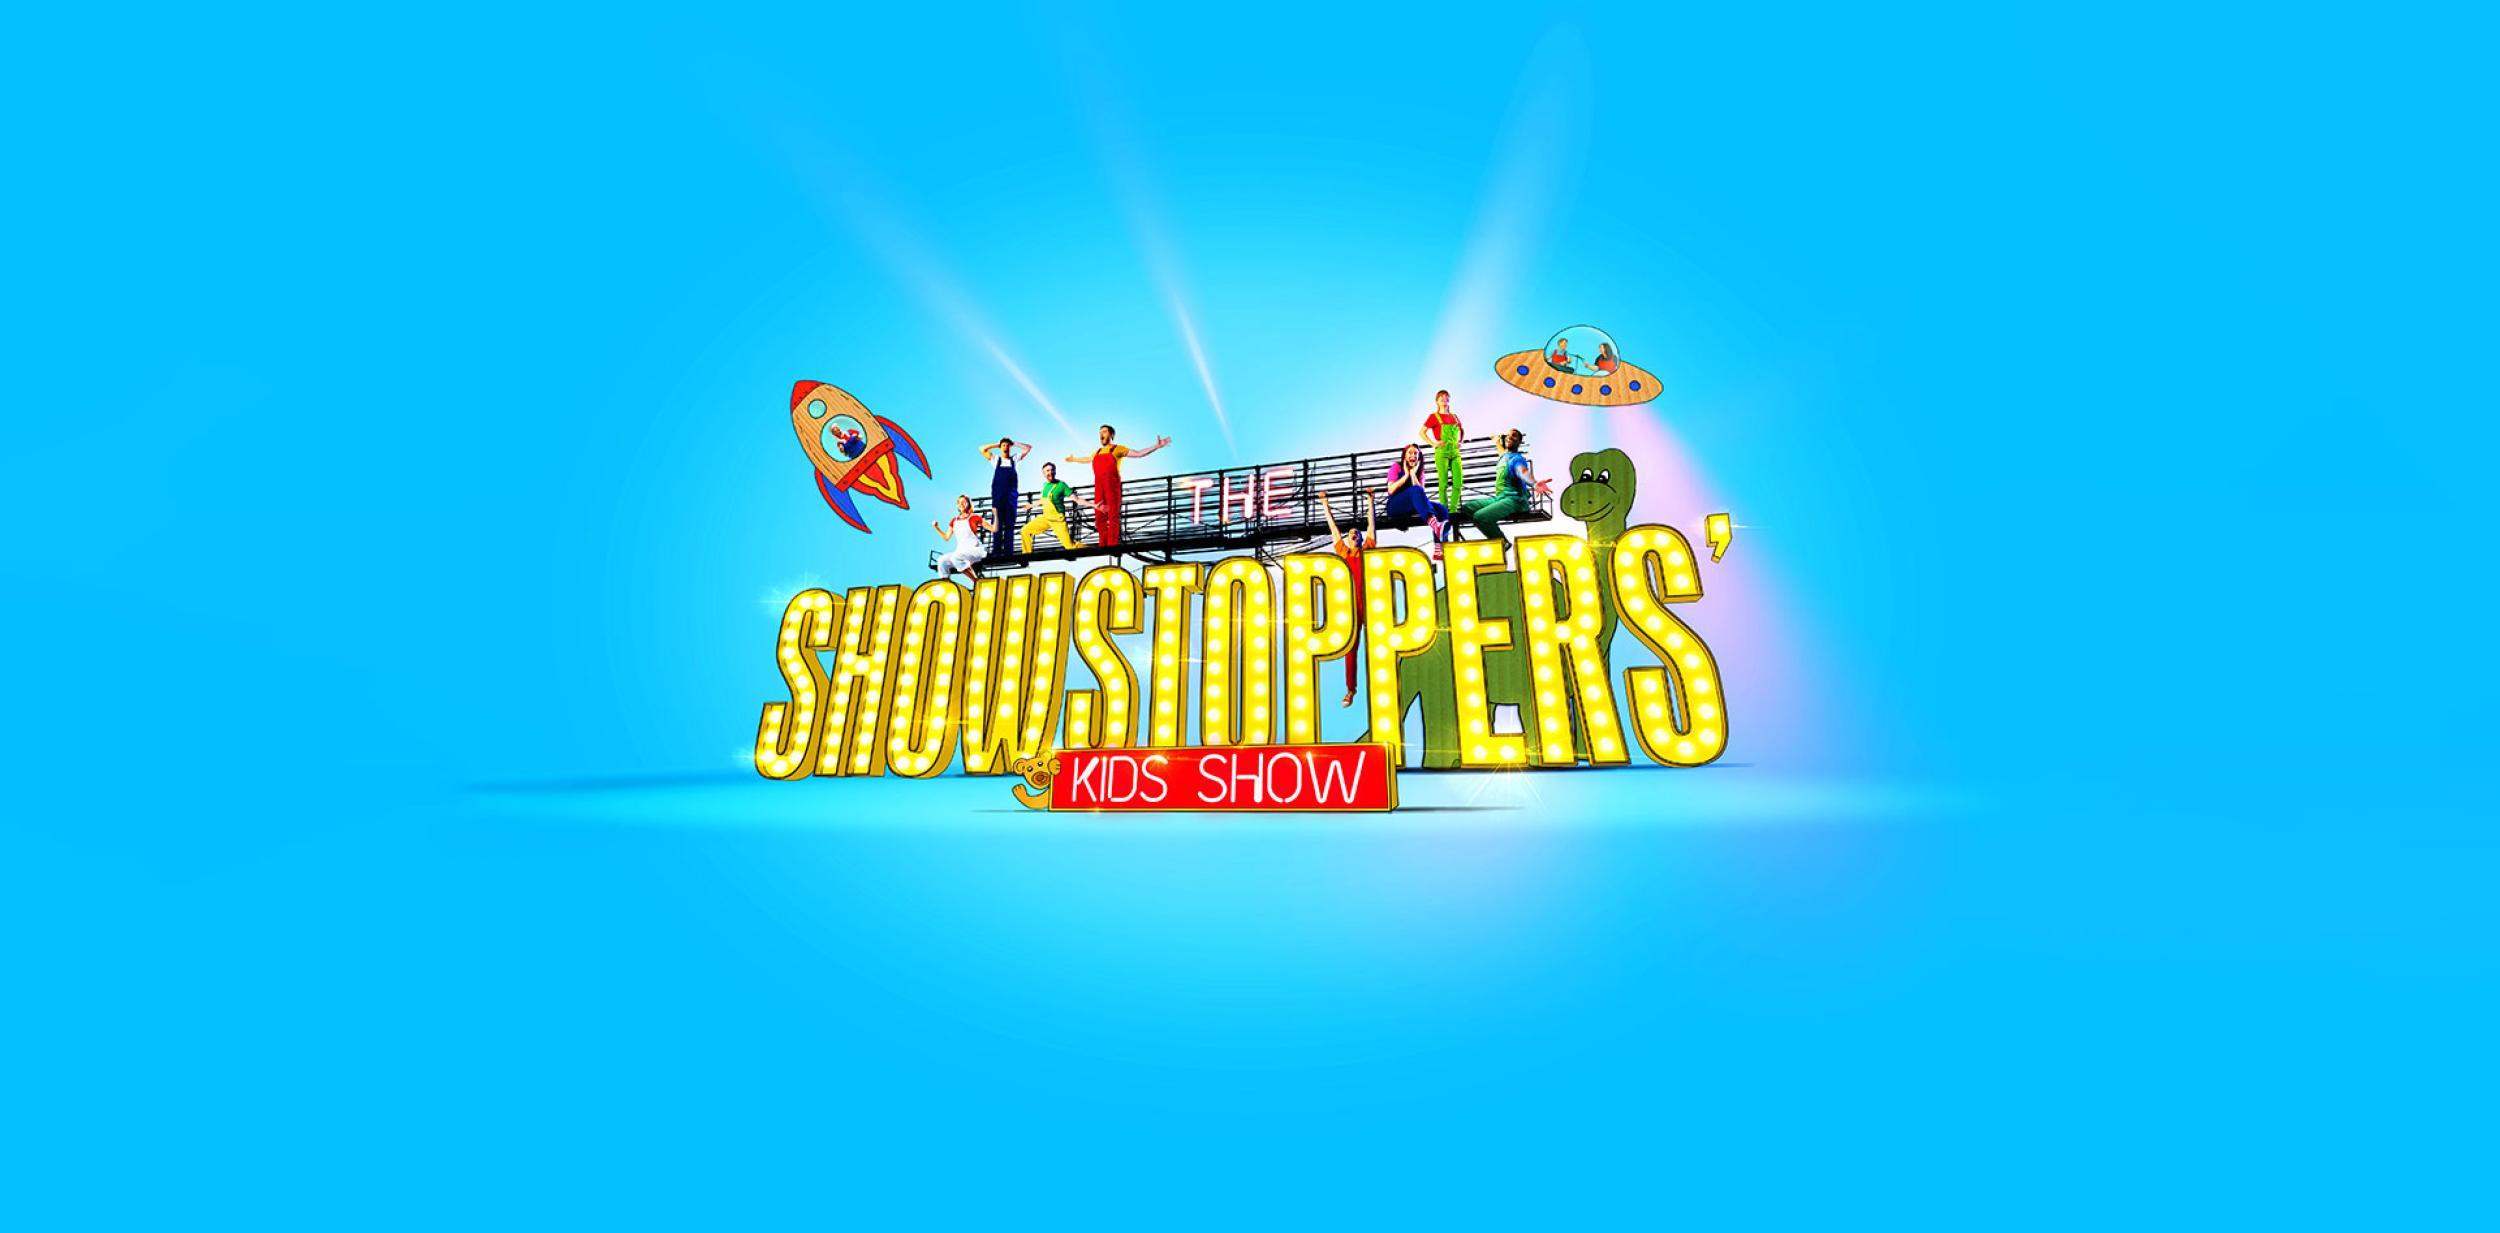 The Showstoppers' Kids Show logo